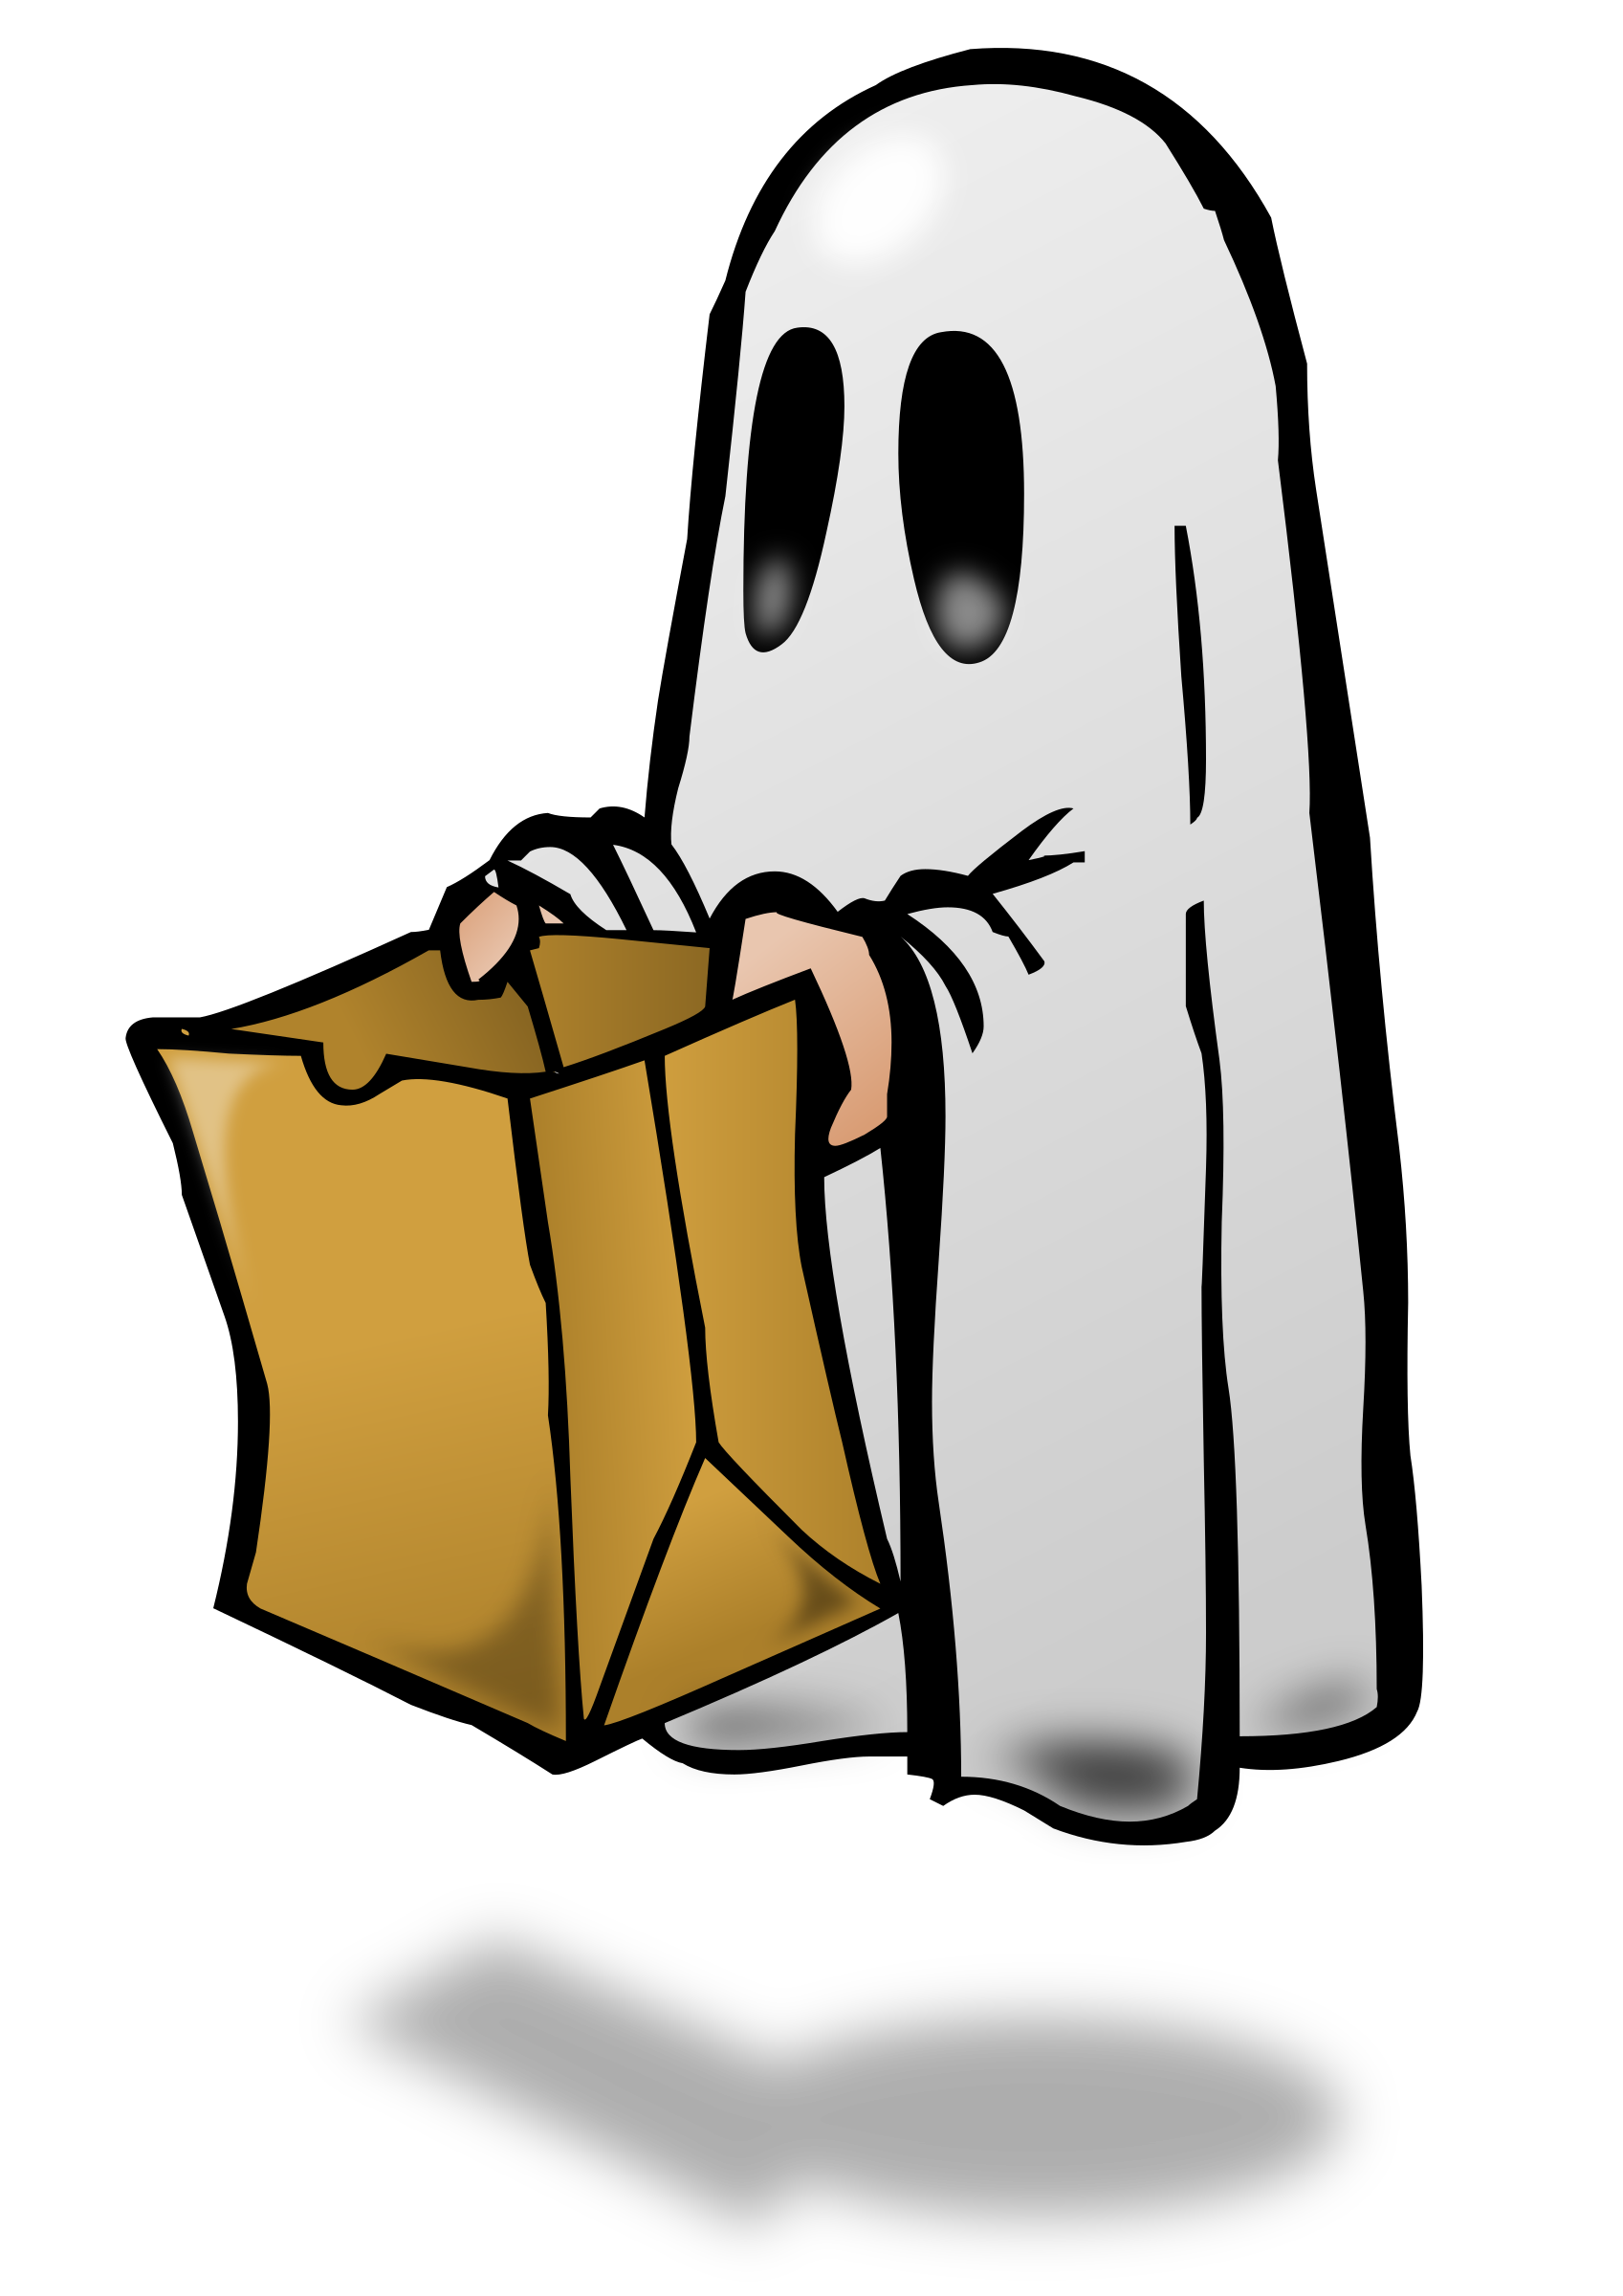 Ghost Trick or Treat Vector Clipart image - Free stock photo - Public Domain photo - CC0 Images